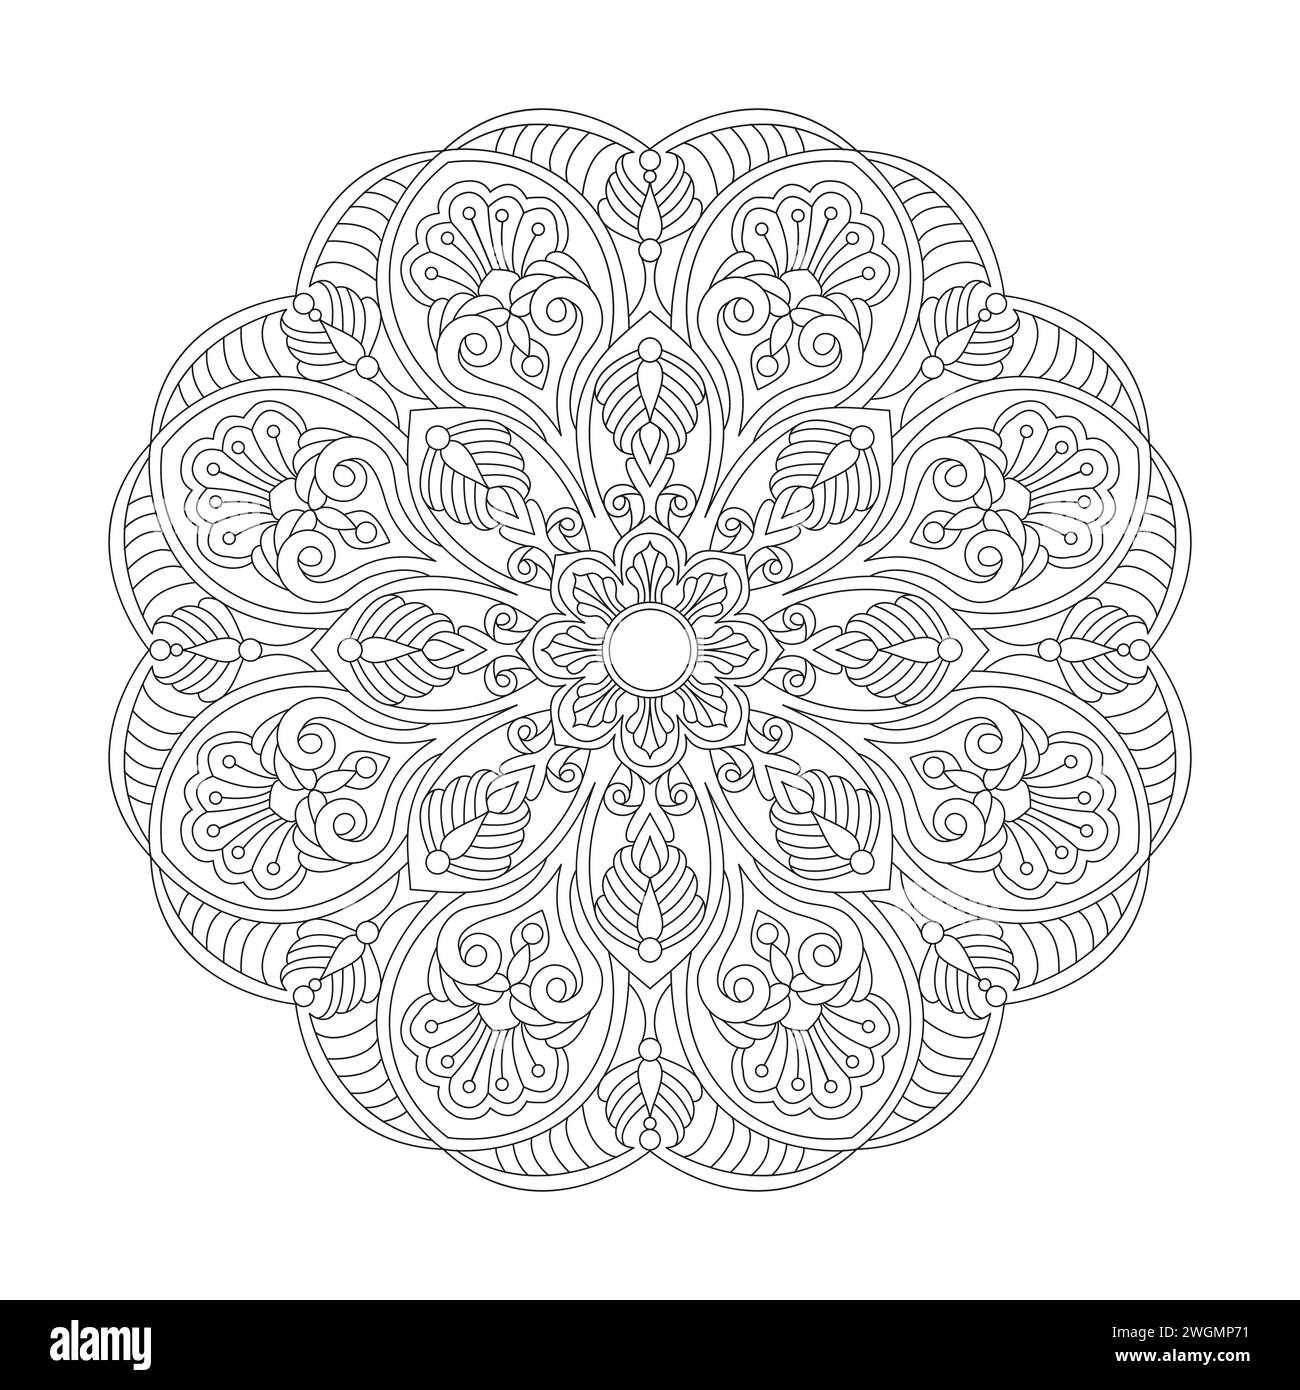 Attractive Beautifull Mandala Coloring Book Page for kdp Book Interior. Peaceful Petals, Ability to Relax, Brain Experiences, Harmonious Haven, Peacef Stock Vector